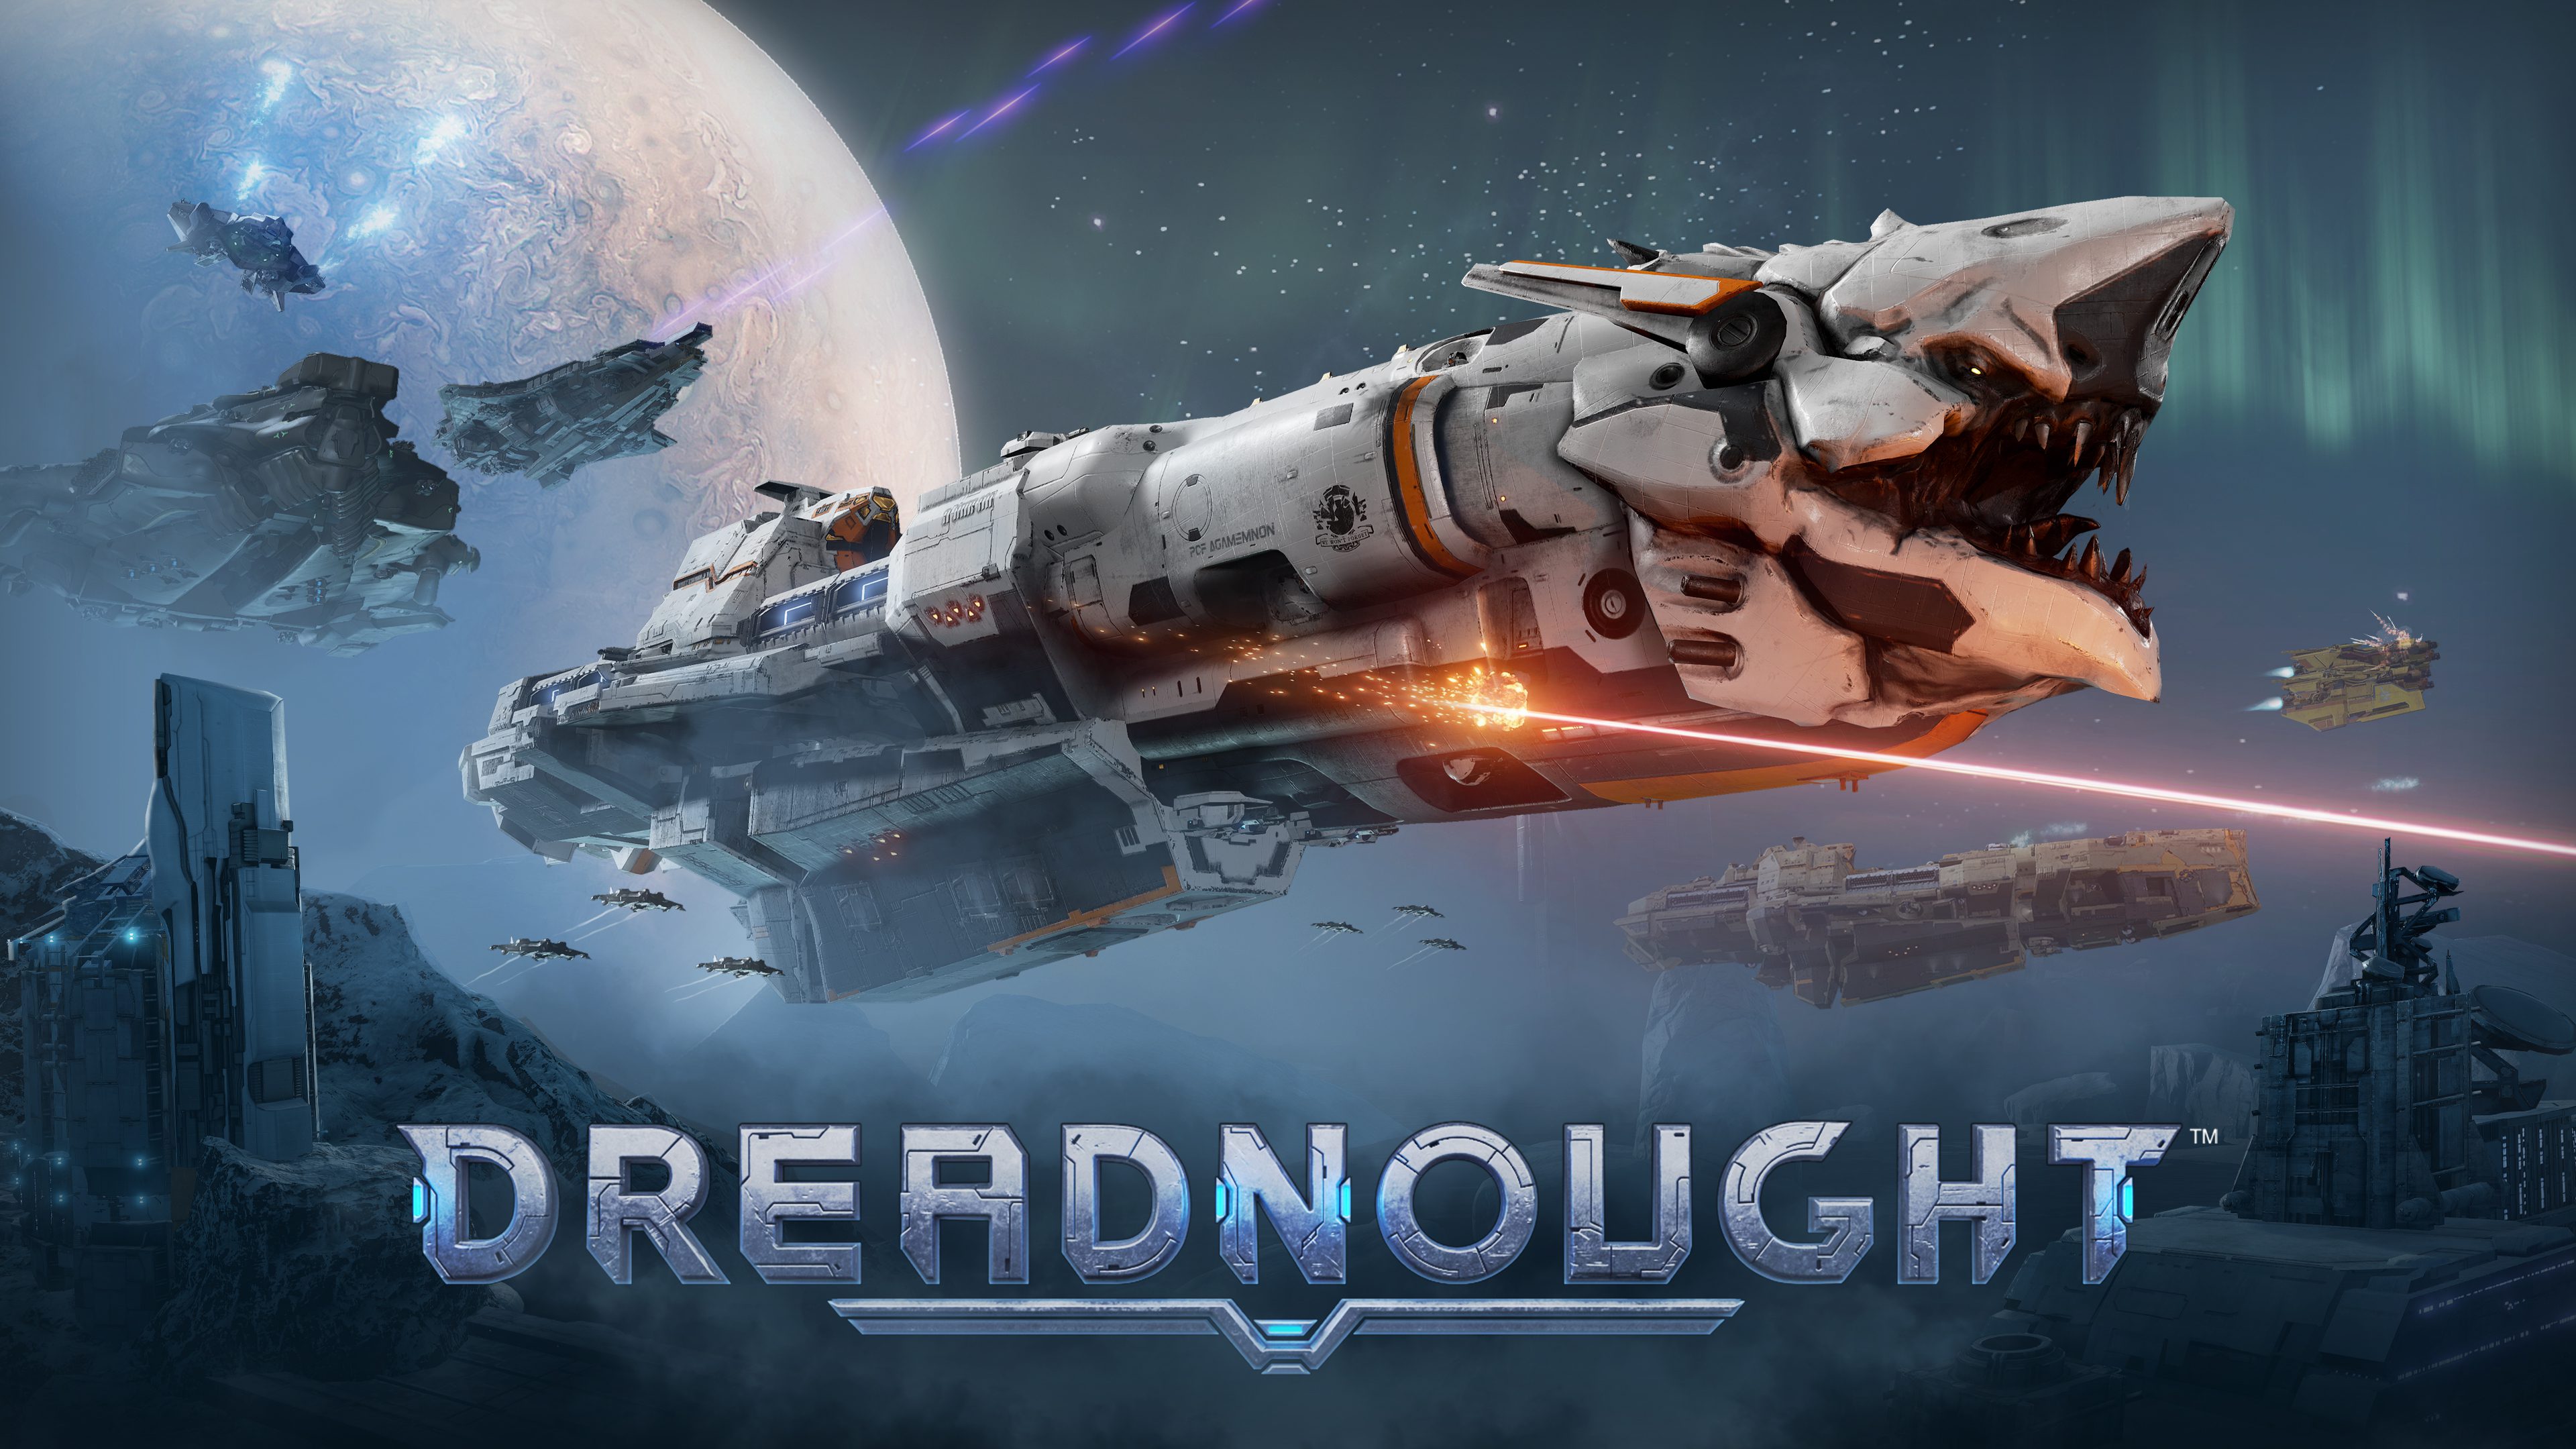 Free-to-play tactical spaceship shooter ‘Dreadnought’ hits Steam